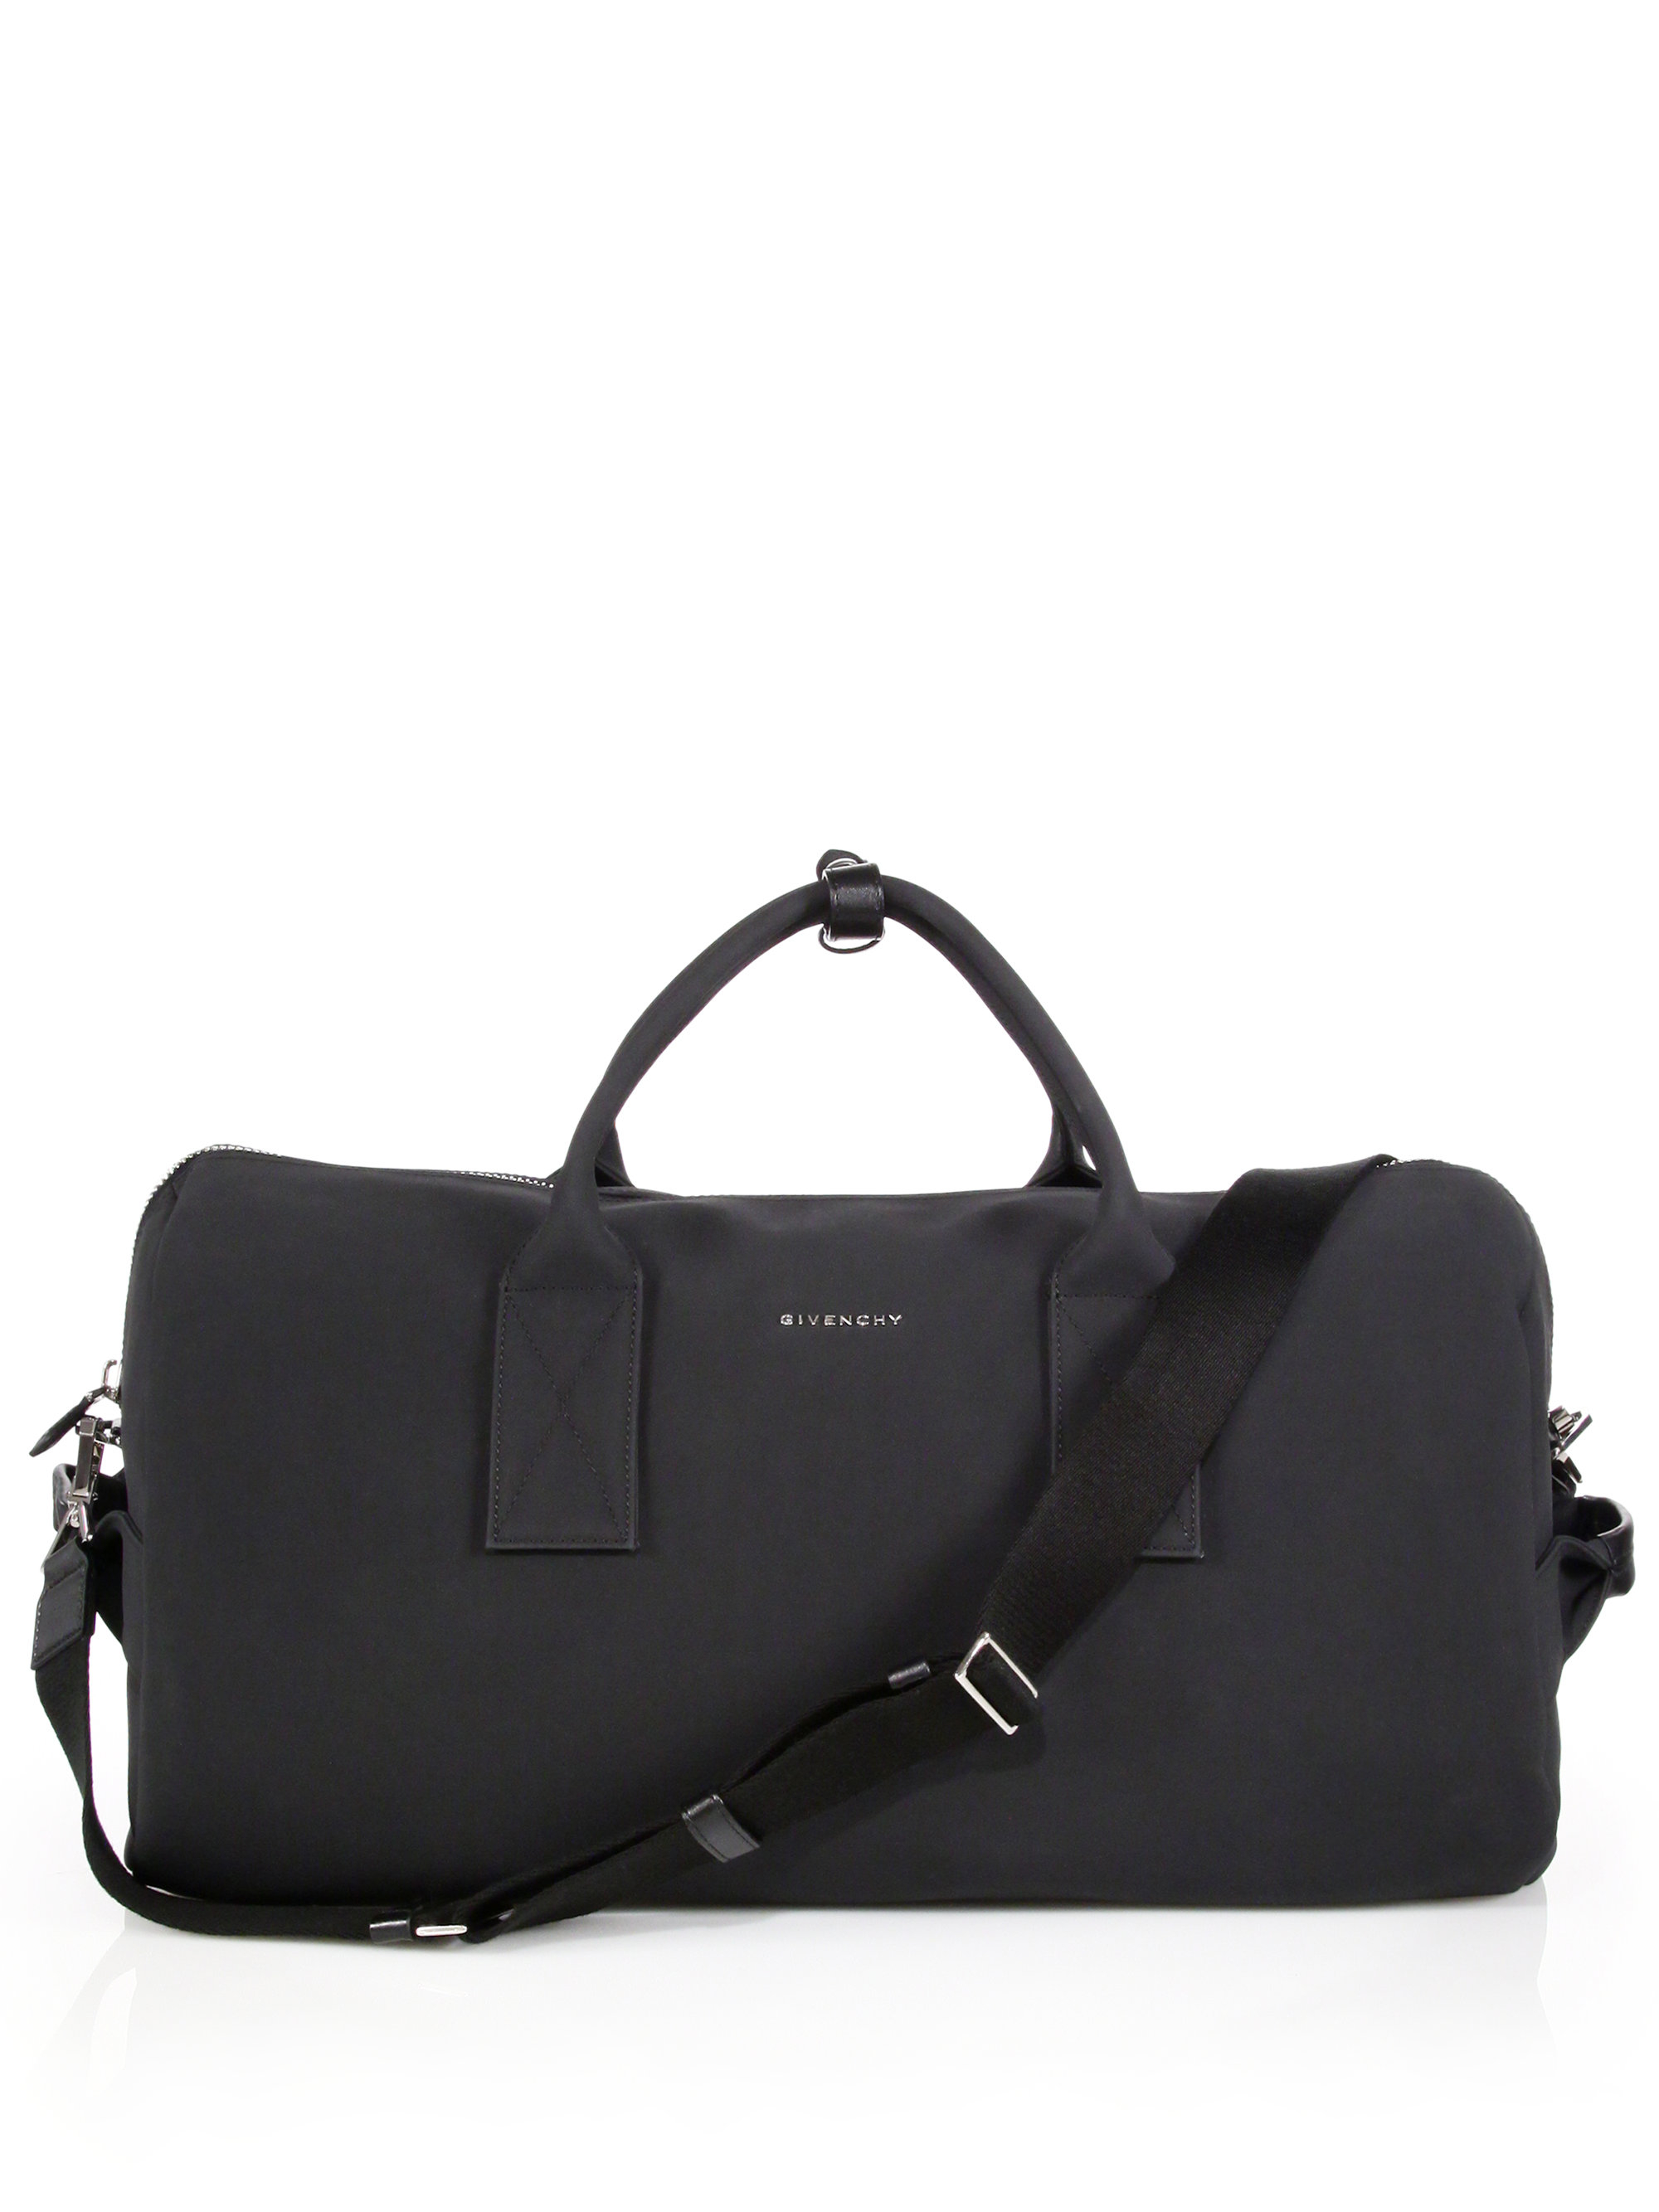 Lyst - Givenchy Items Gym Bag in Black for Men